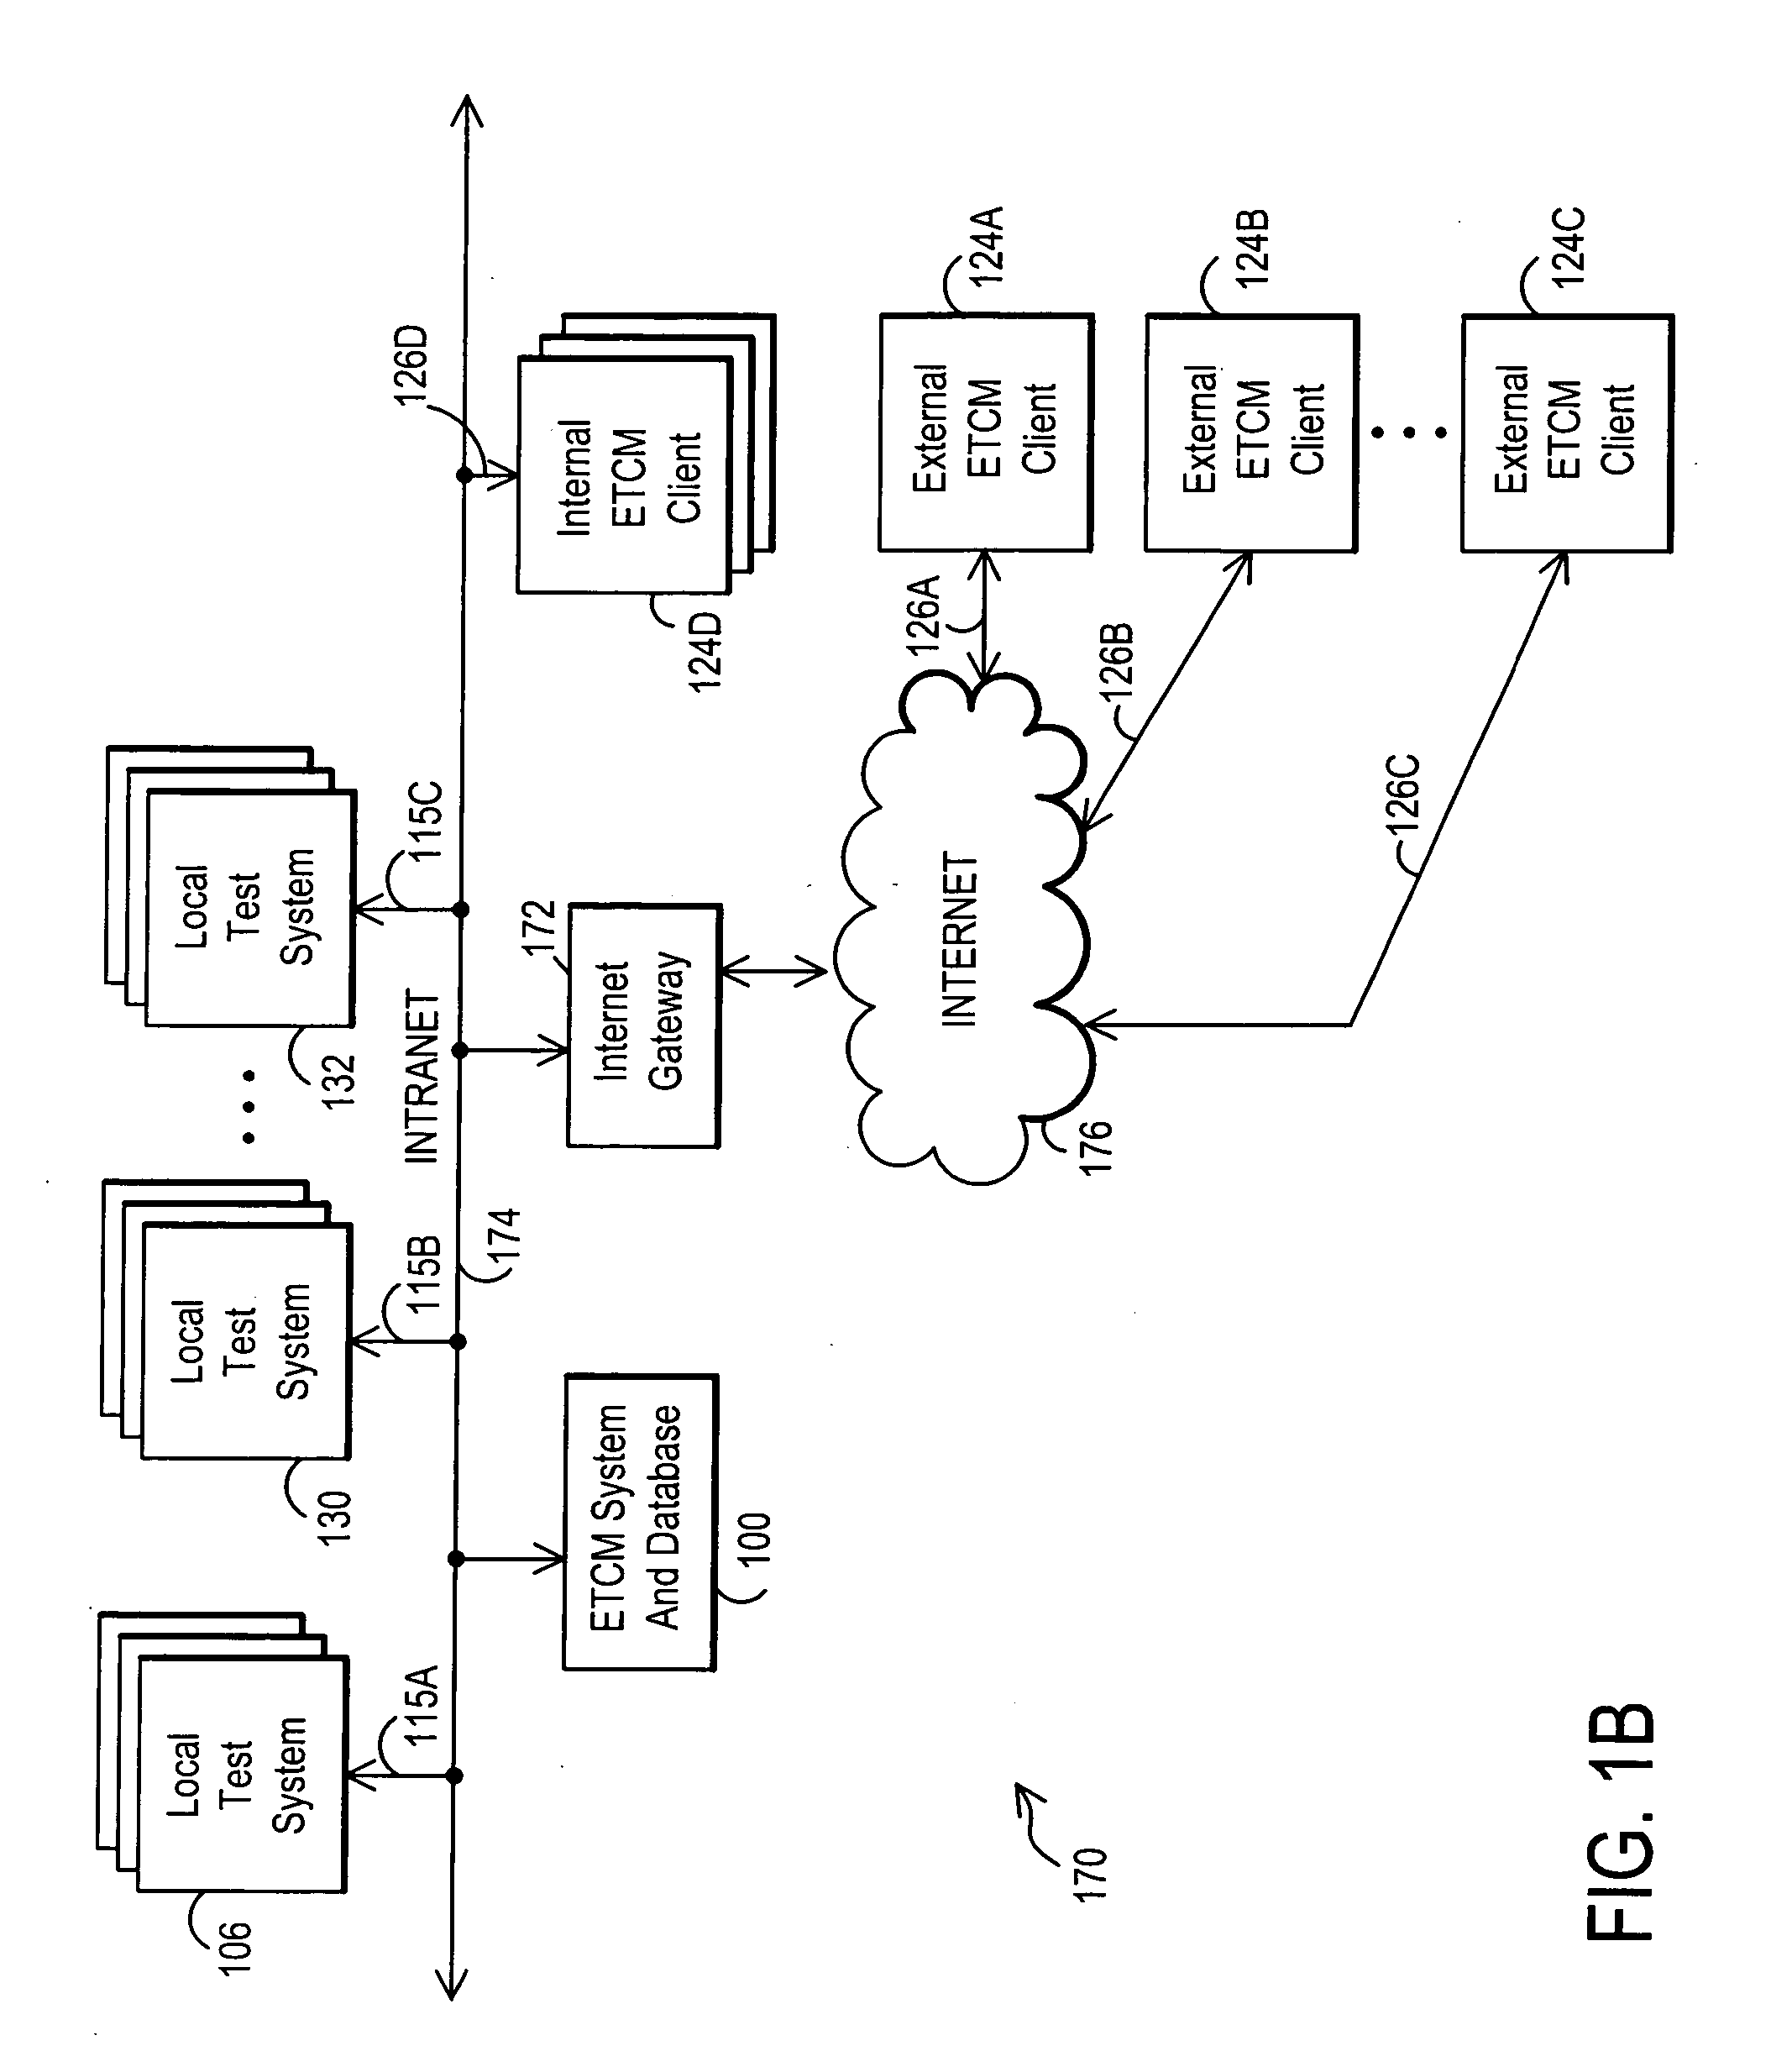 Enterprise test data management system utilizing automatically created test data structures and related methods